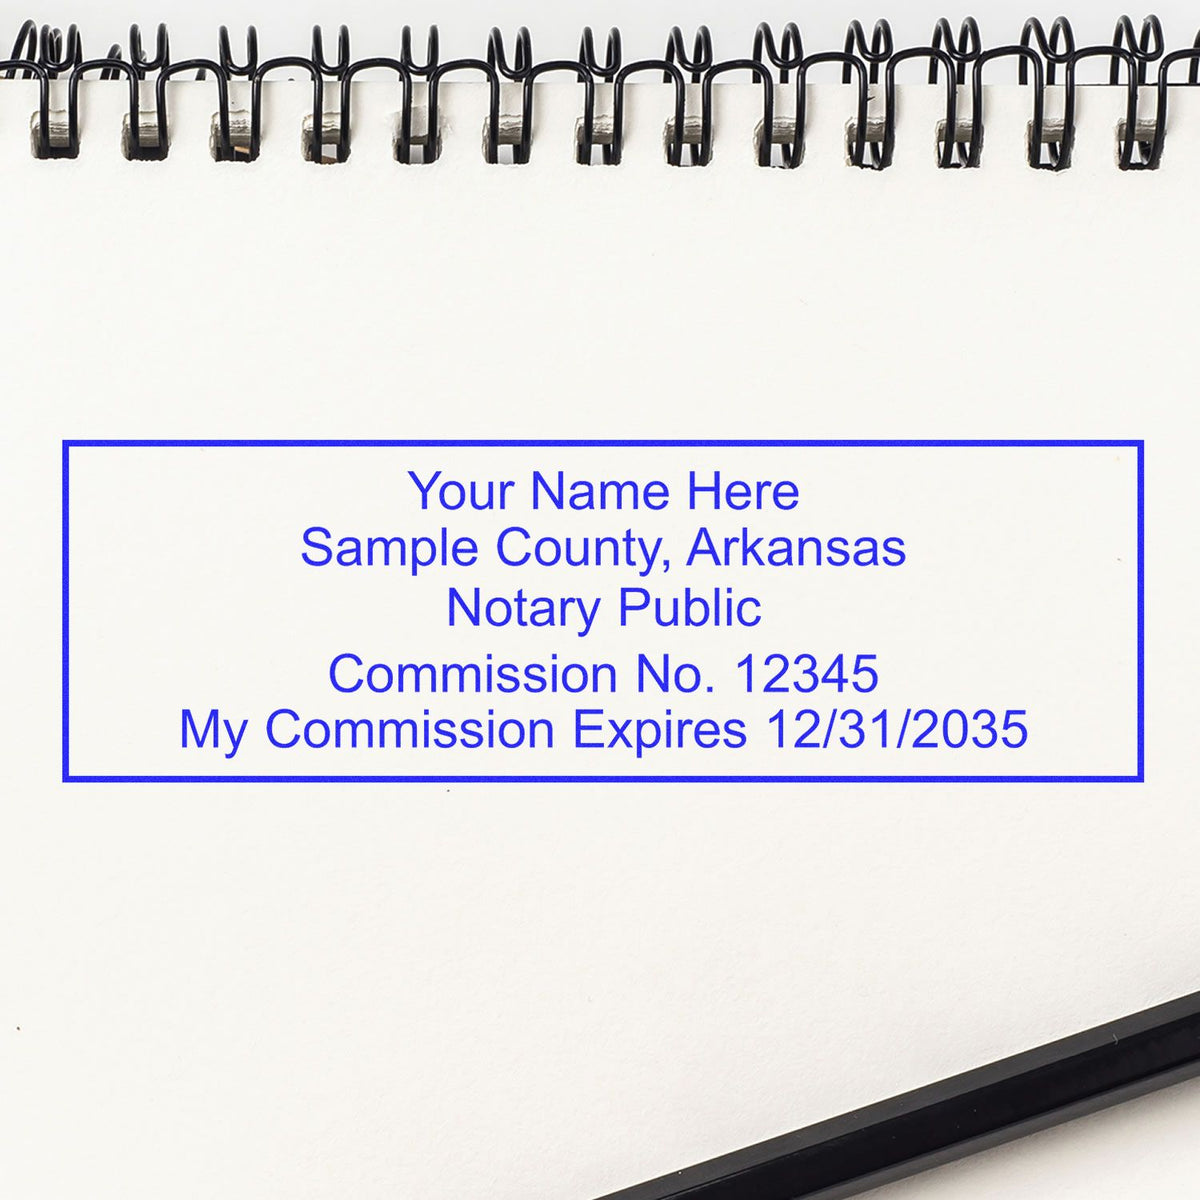 The Self-Inking Rectangular Arkansas Notary Stamp stamp impression comes to life with a crisp, detailed photo on paper - showcasing true professional quality.